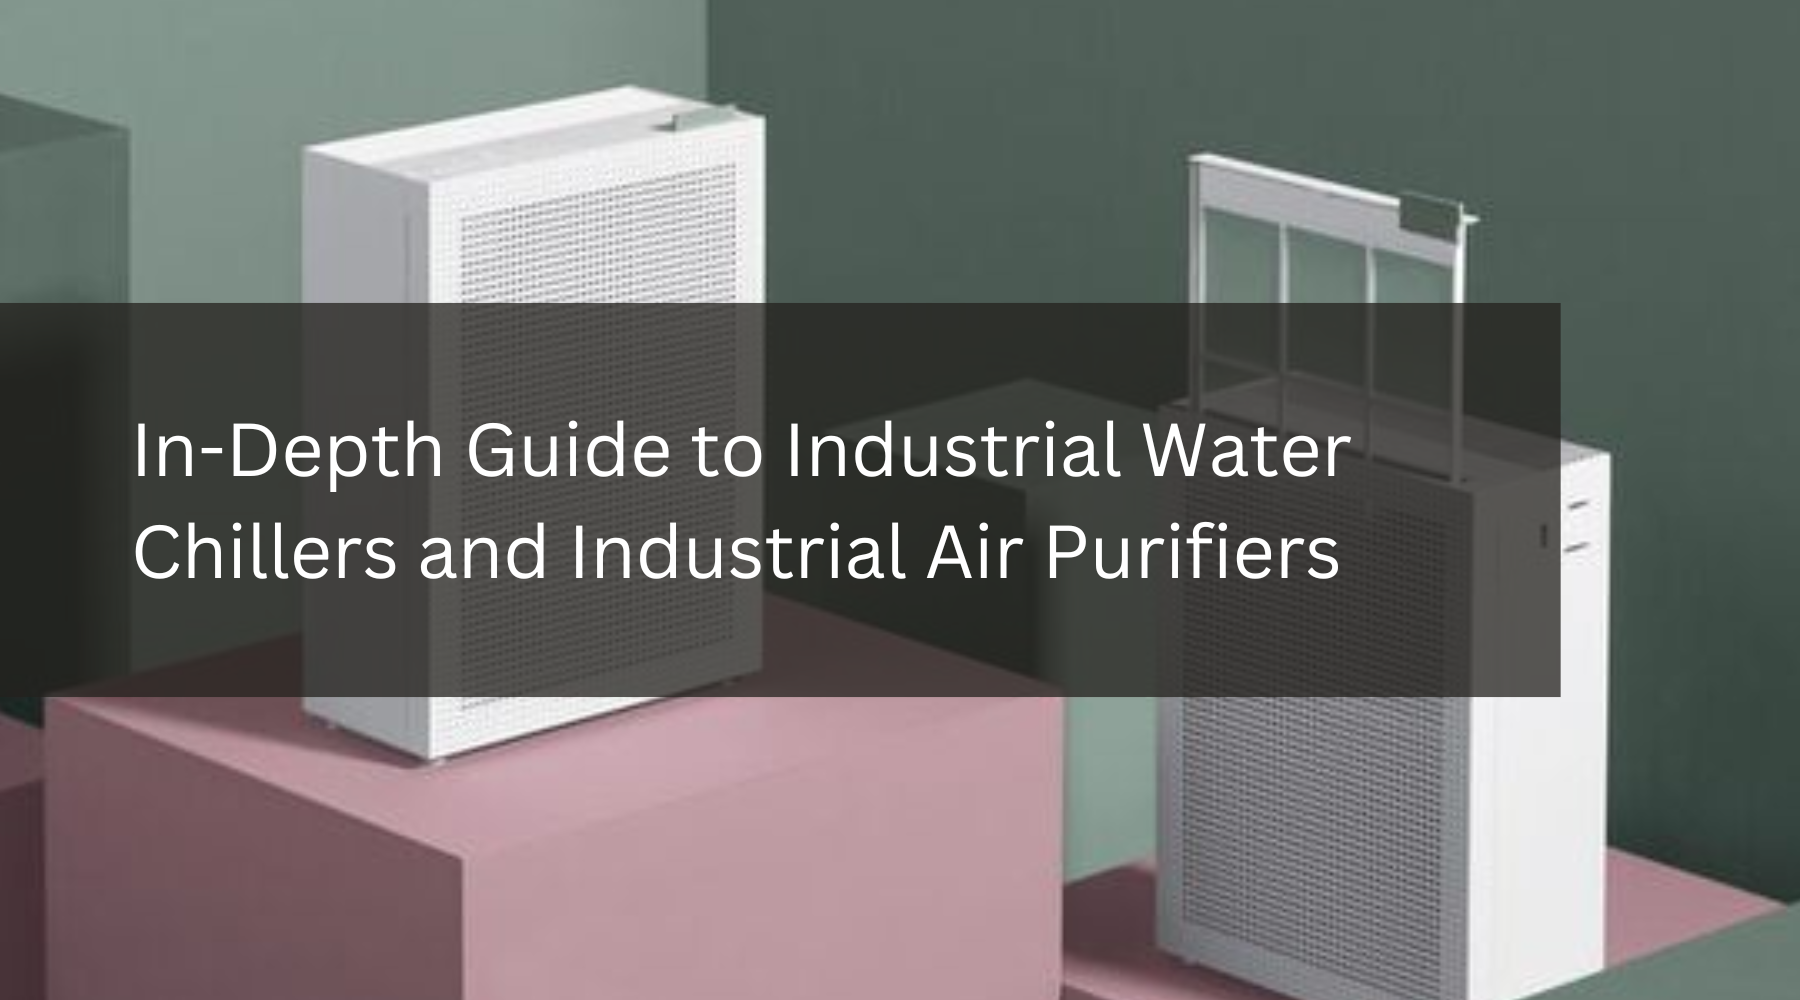 In-Depth Guide to Industrial Water Chillers and Industrial Air Purifiers